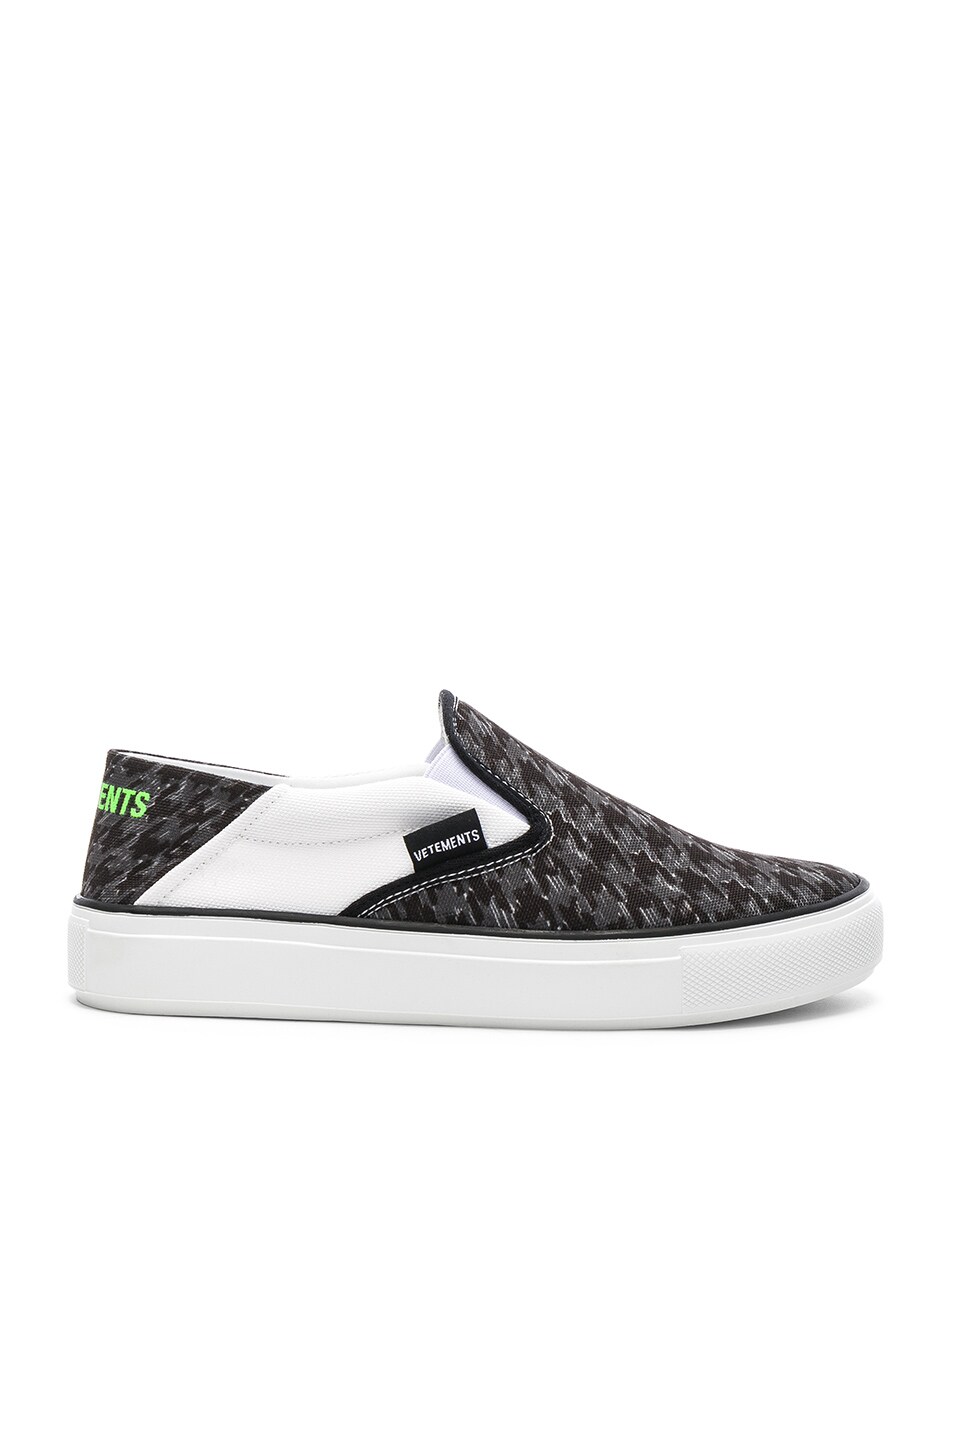 Image 1 of VETEMENTS Canvas Checkerboard Slip On Sneakers in Black & White